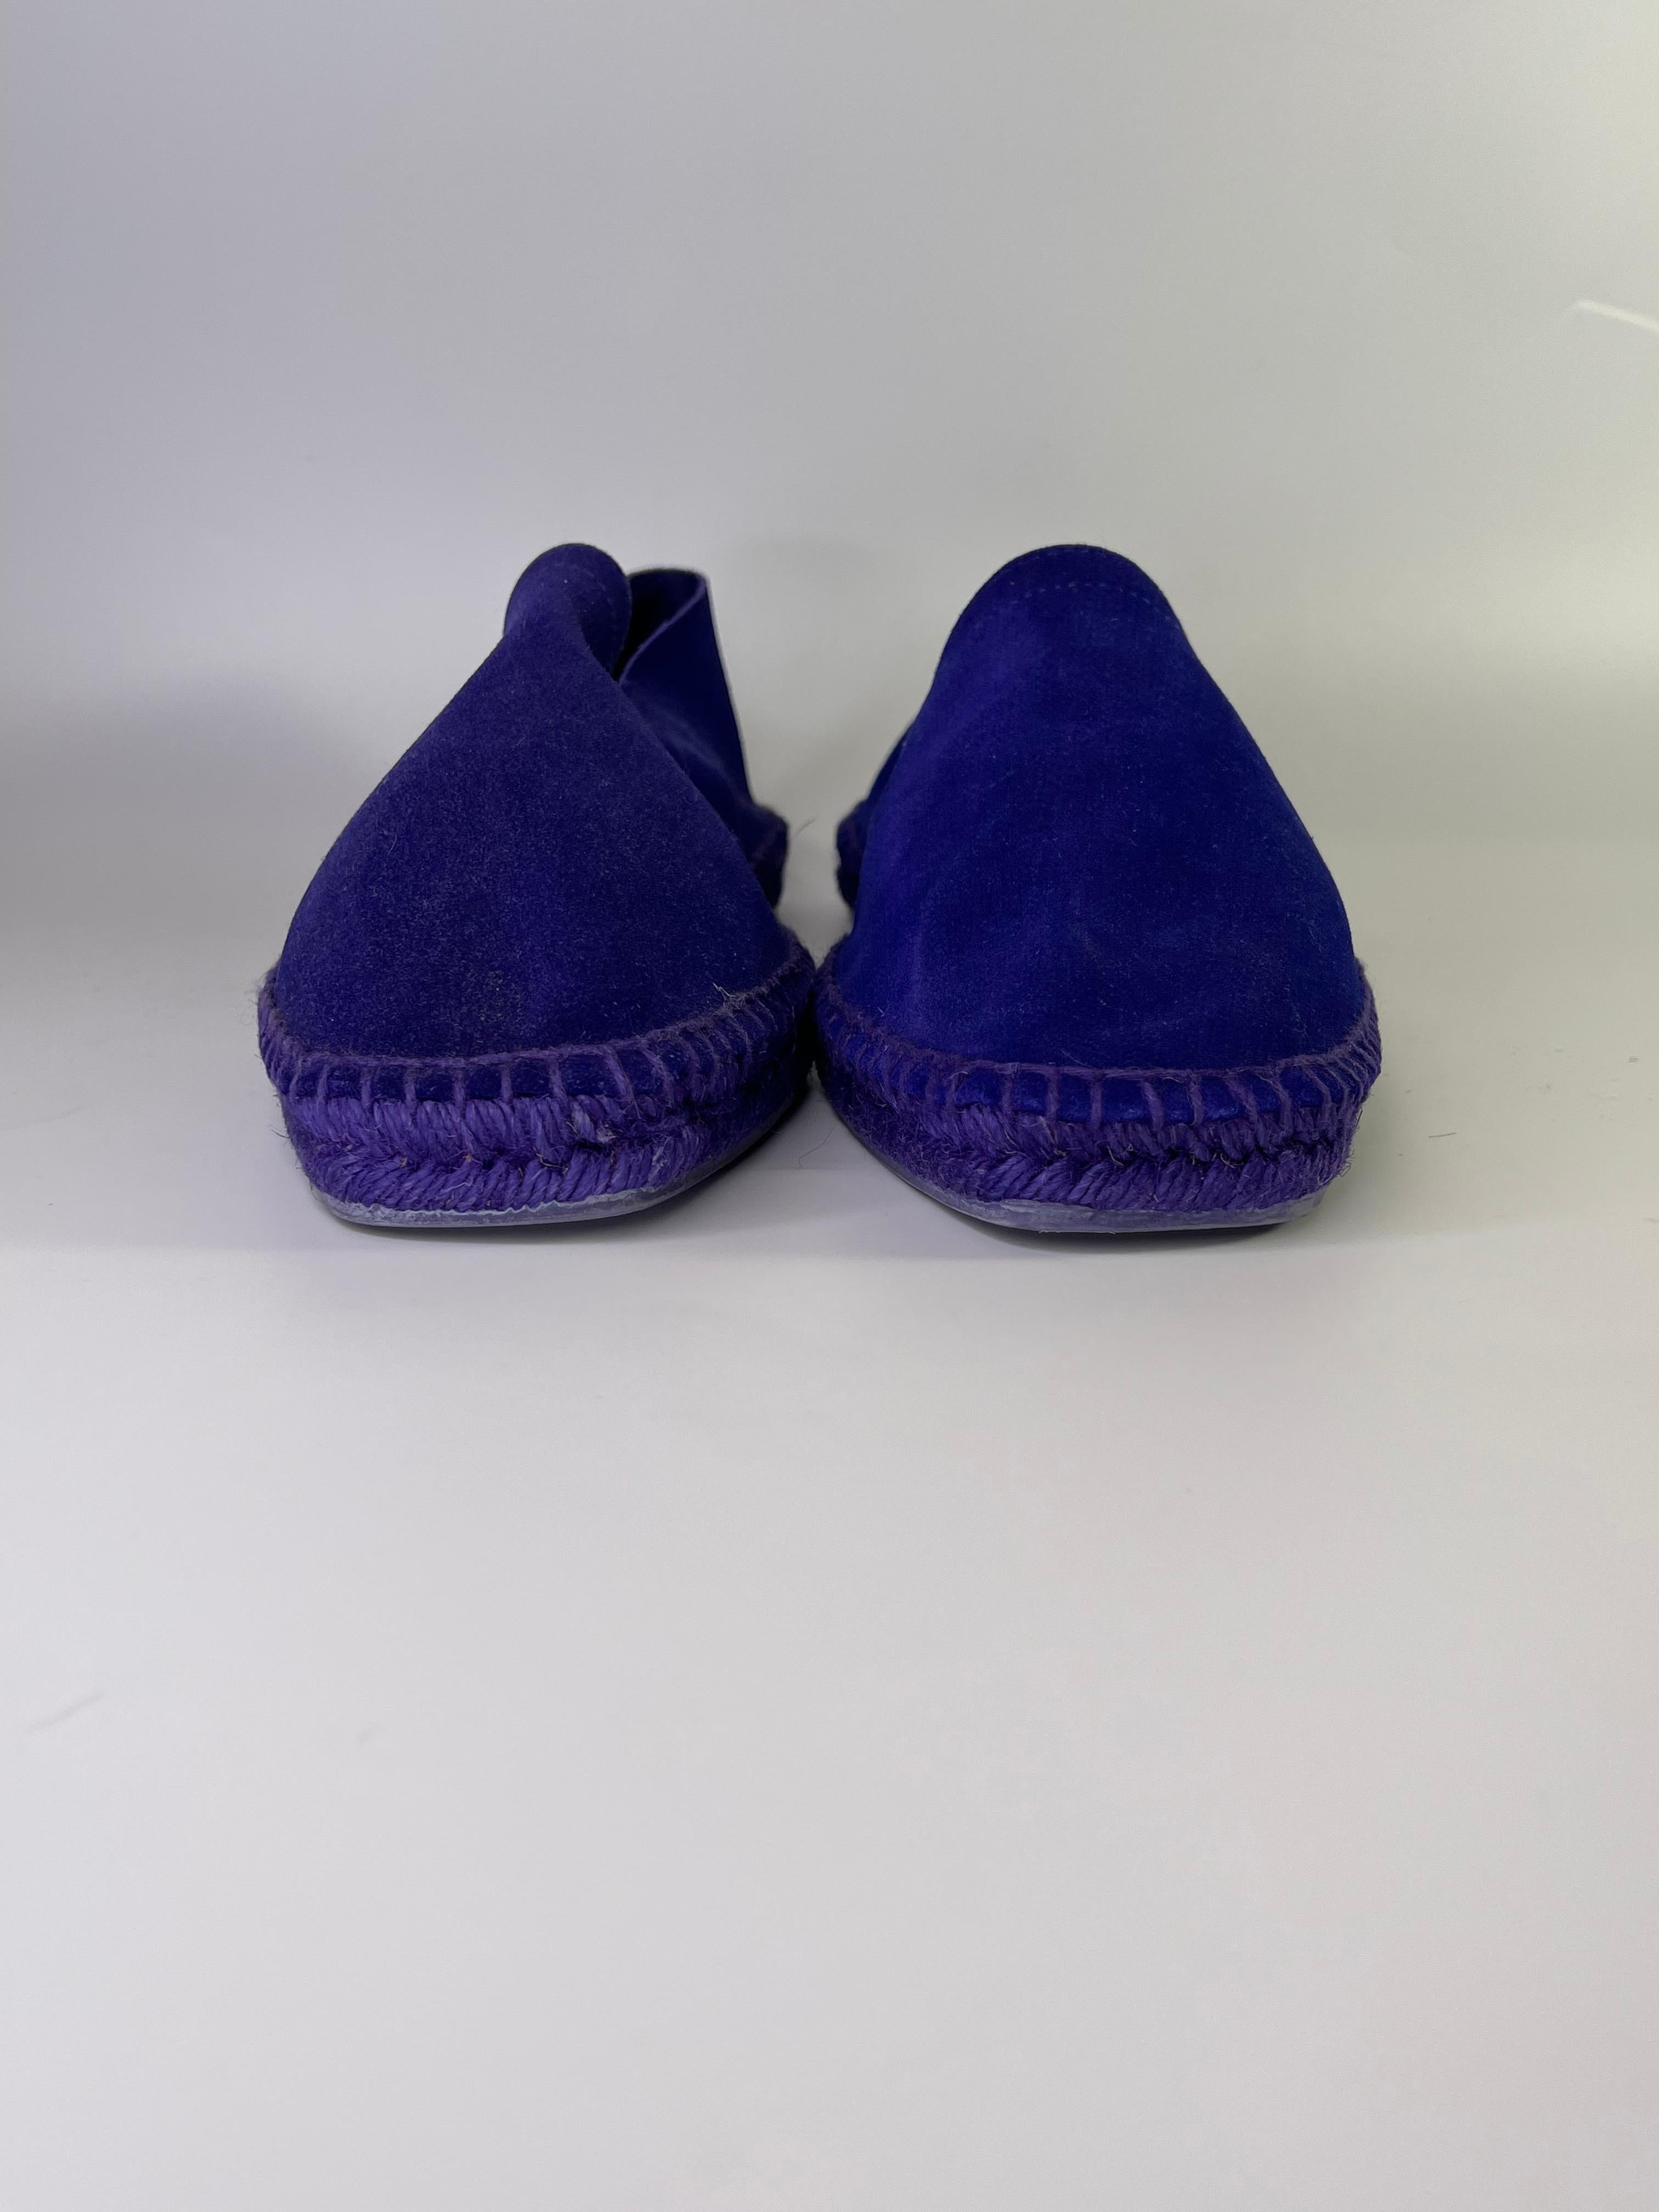 Featuring sueded exterior, solid color, almond toe line, rubber sole, rope hem and a flat under sole.

COLOR: Purple
MATERIAL: Suede
ITEM CODE: J0681T
SIZE: 9 US
COMES WITH: Dust bags & shoe box
CONDITION: Like new - have been tried on.

Made in